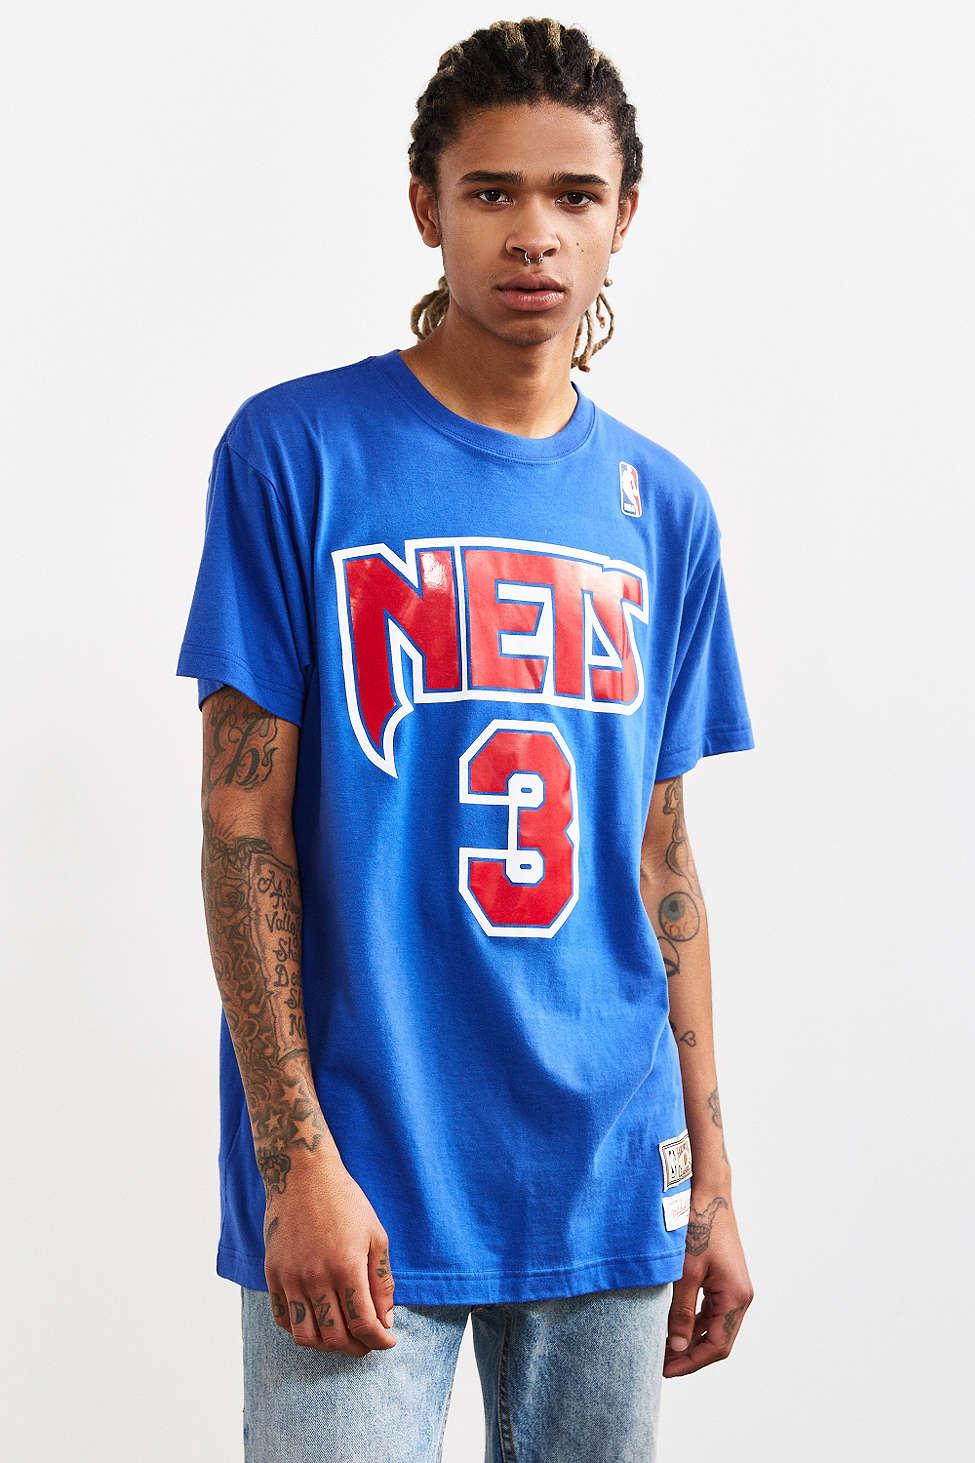 Mitchell & Ness Cotton New Jersey Nets Drazen Petrovic Tee in Blue for Men  - Lyst